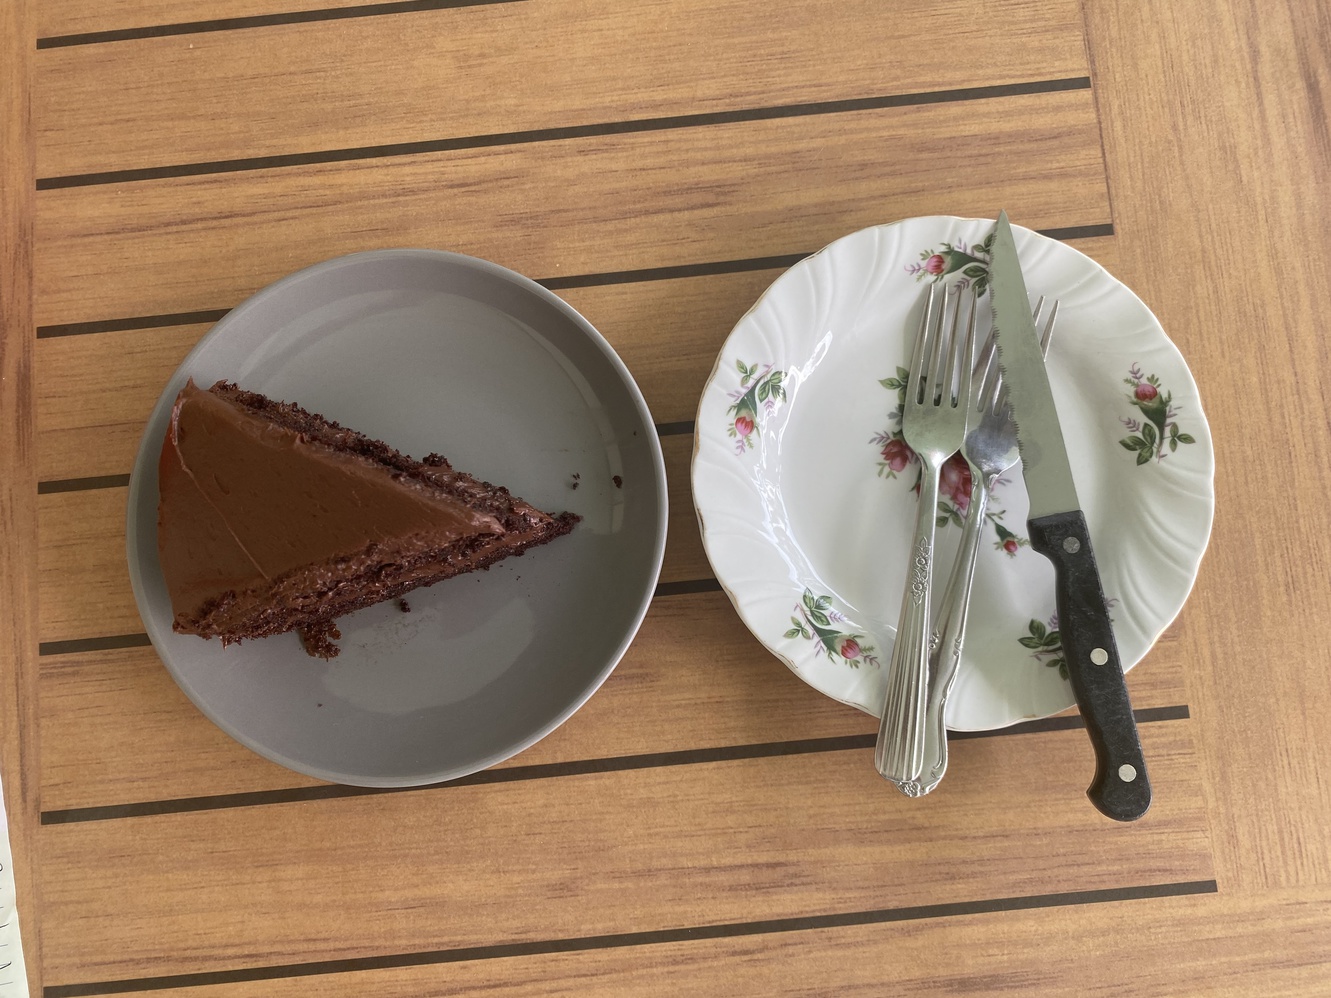 This piece of chocolate-chocolate cake is enough for two
      people.